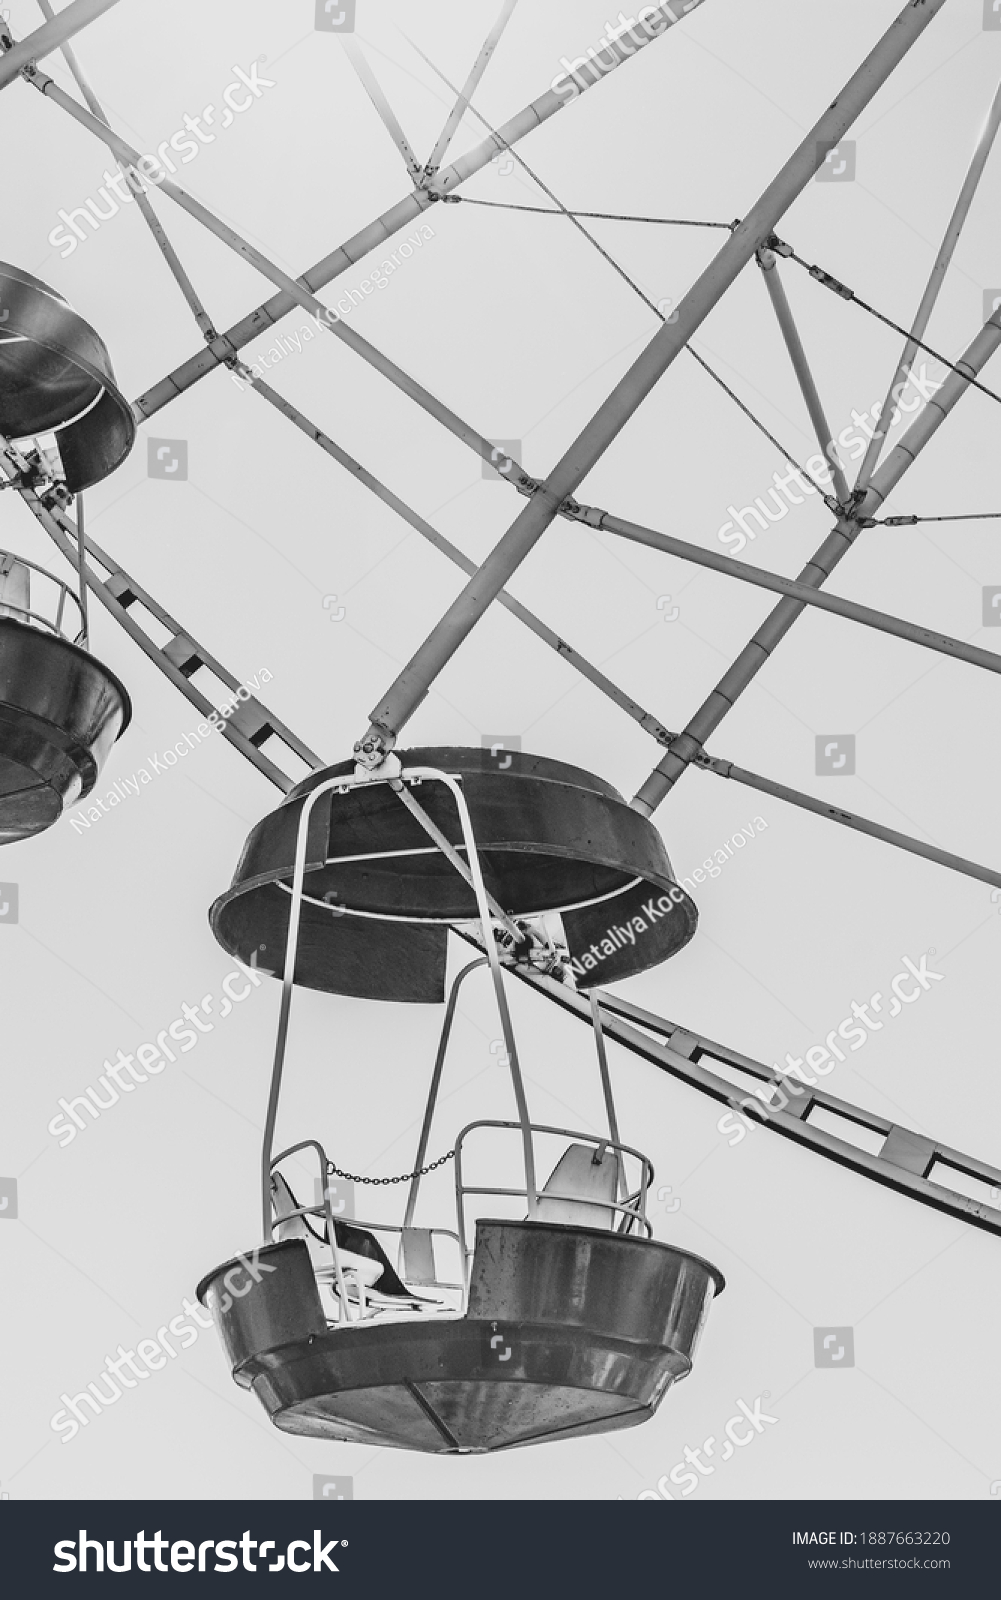 Ferris wheel booths in black and white image. The cabin of the Ferris wheel against the sky on top.Background image of the Ferris wheel. vertical image #1887663220